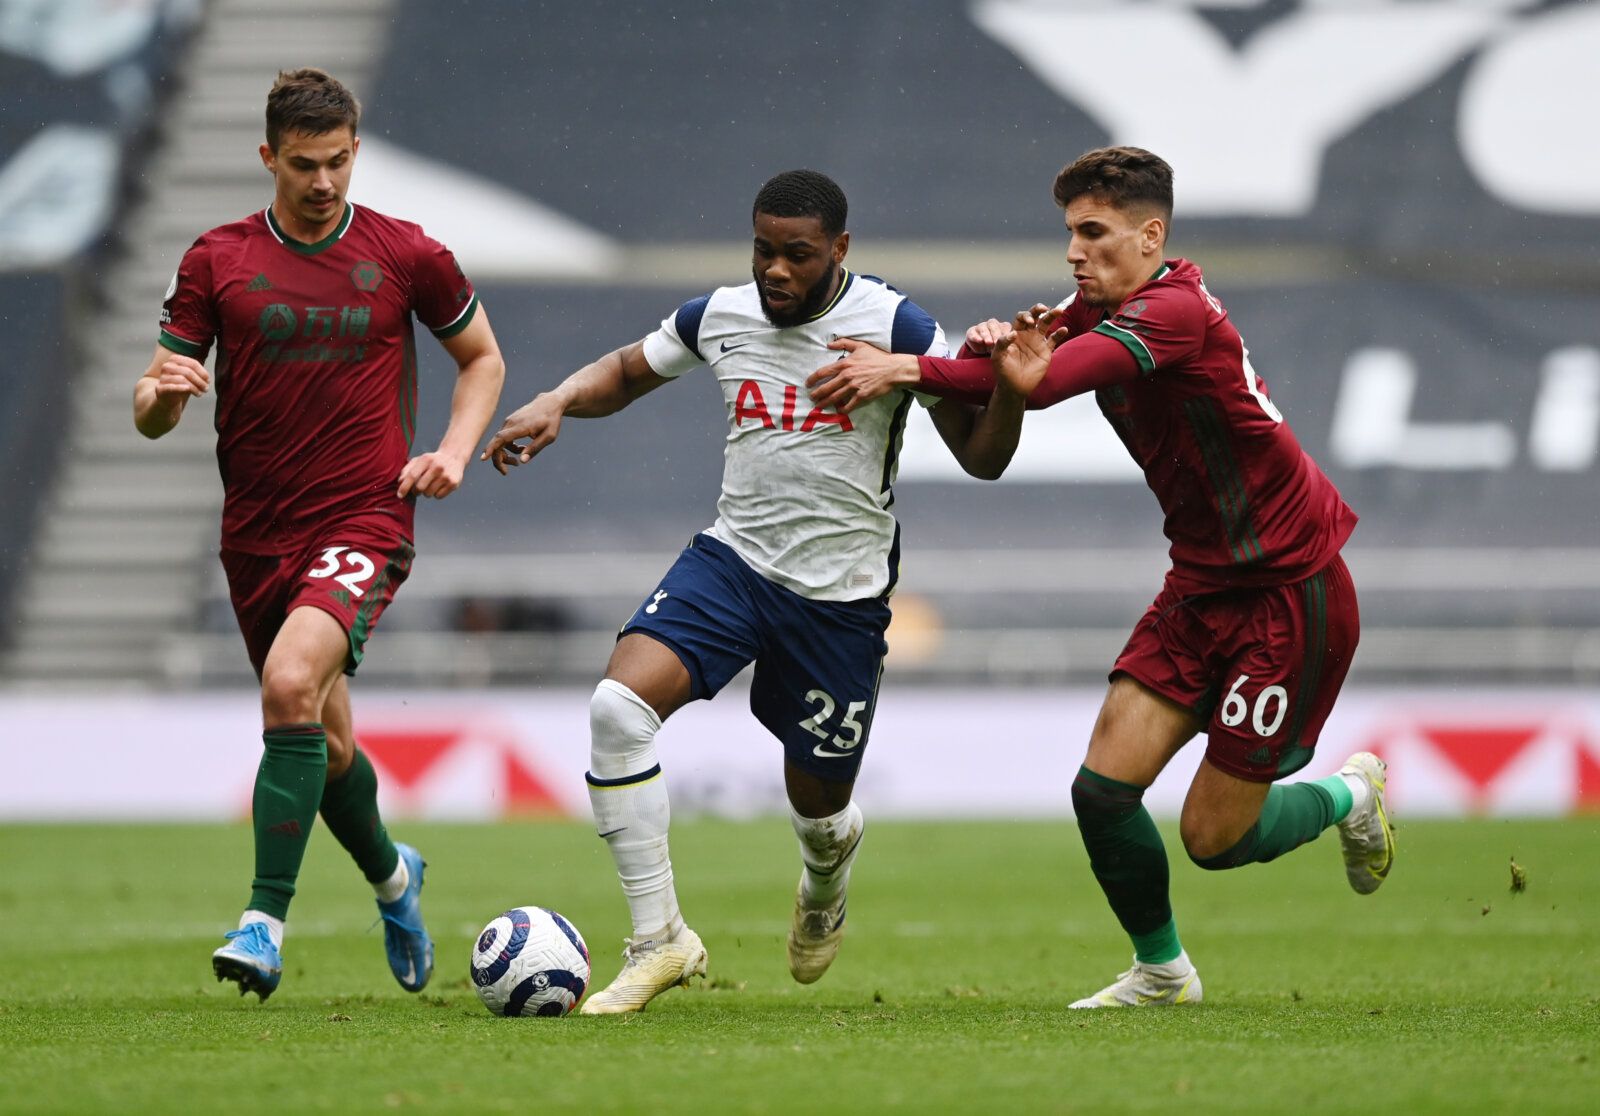 Soccer Football - Premier League - Tottenham Hotspur v Wolverhampton Wanderers - Tottenham Hotspur Stadium, London, Britain - May 16, 2021 Tottenham Hotspur's Japhet Tanganga in action with Wolverhampton Wanderers' Leander Dendoncker and Theo Corbeanu Pool via REUTERS/Shaun Botterill EDITORIAL USE ONLY. No use with unauthorized audio, video, data, fixture lists, club/league logos or 'live' services. Online in-match use limited to 75 images, no video emulation. No use in betting, games or single 